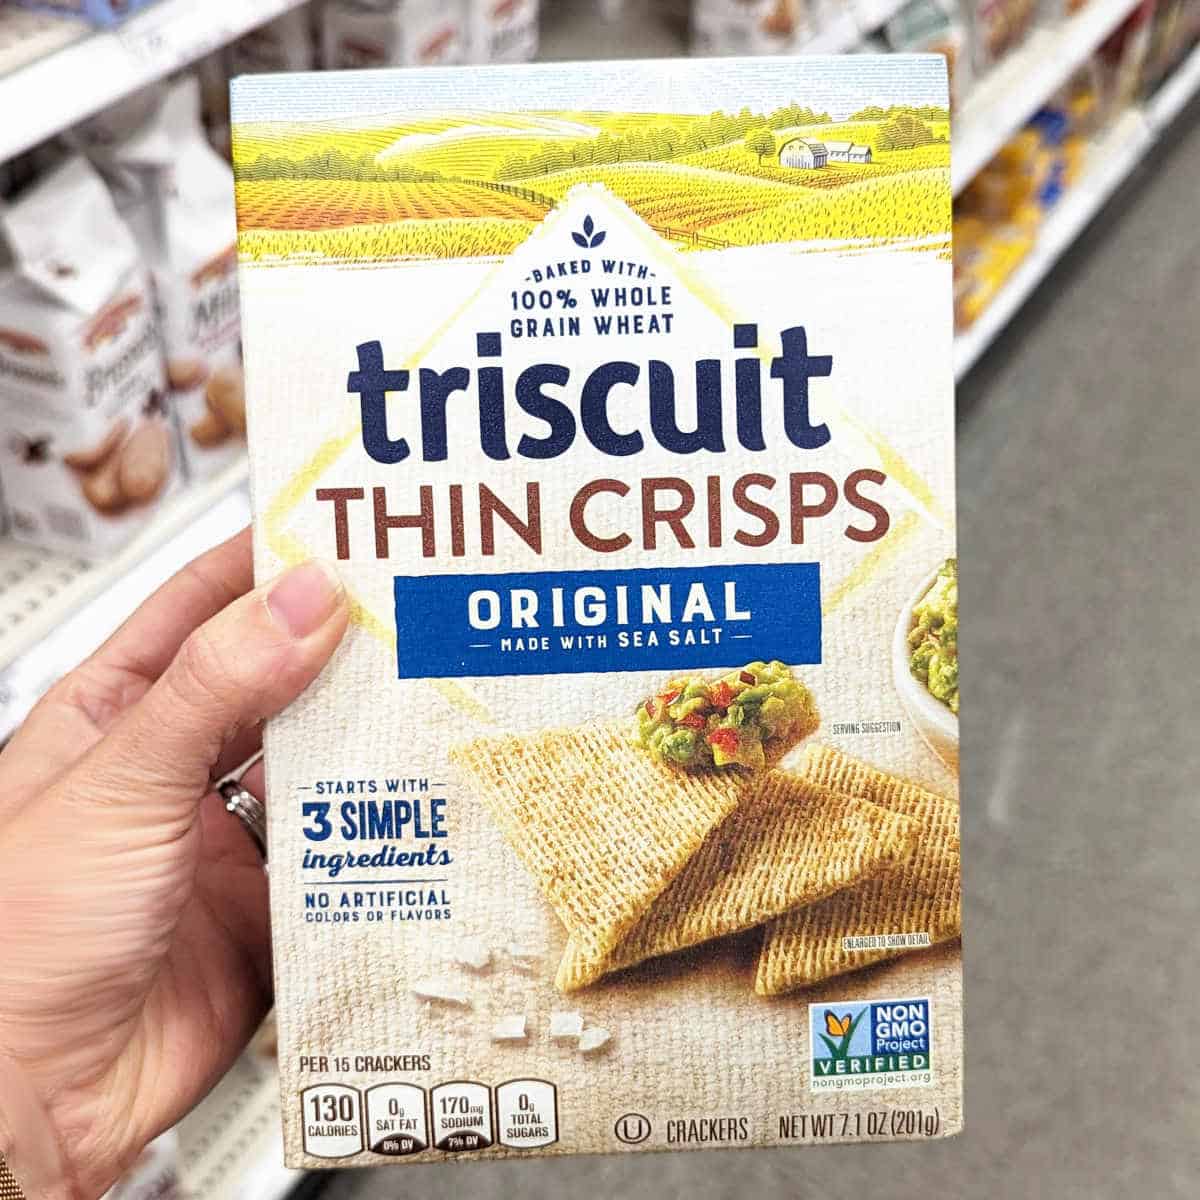 A box of Triscuit thin crisps crackers.